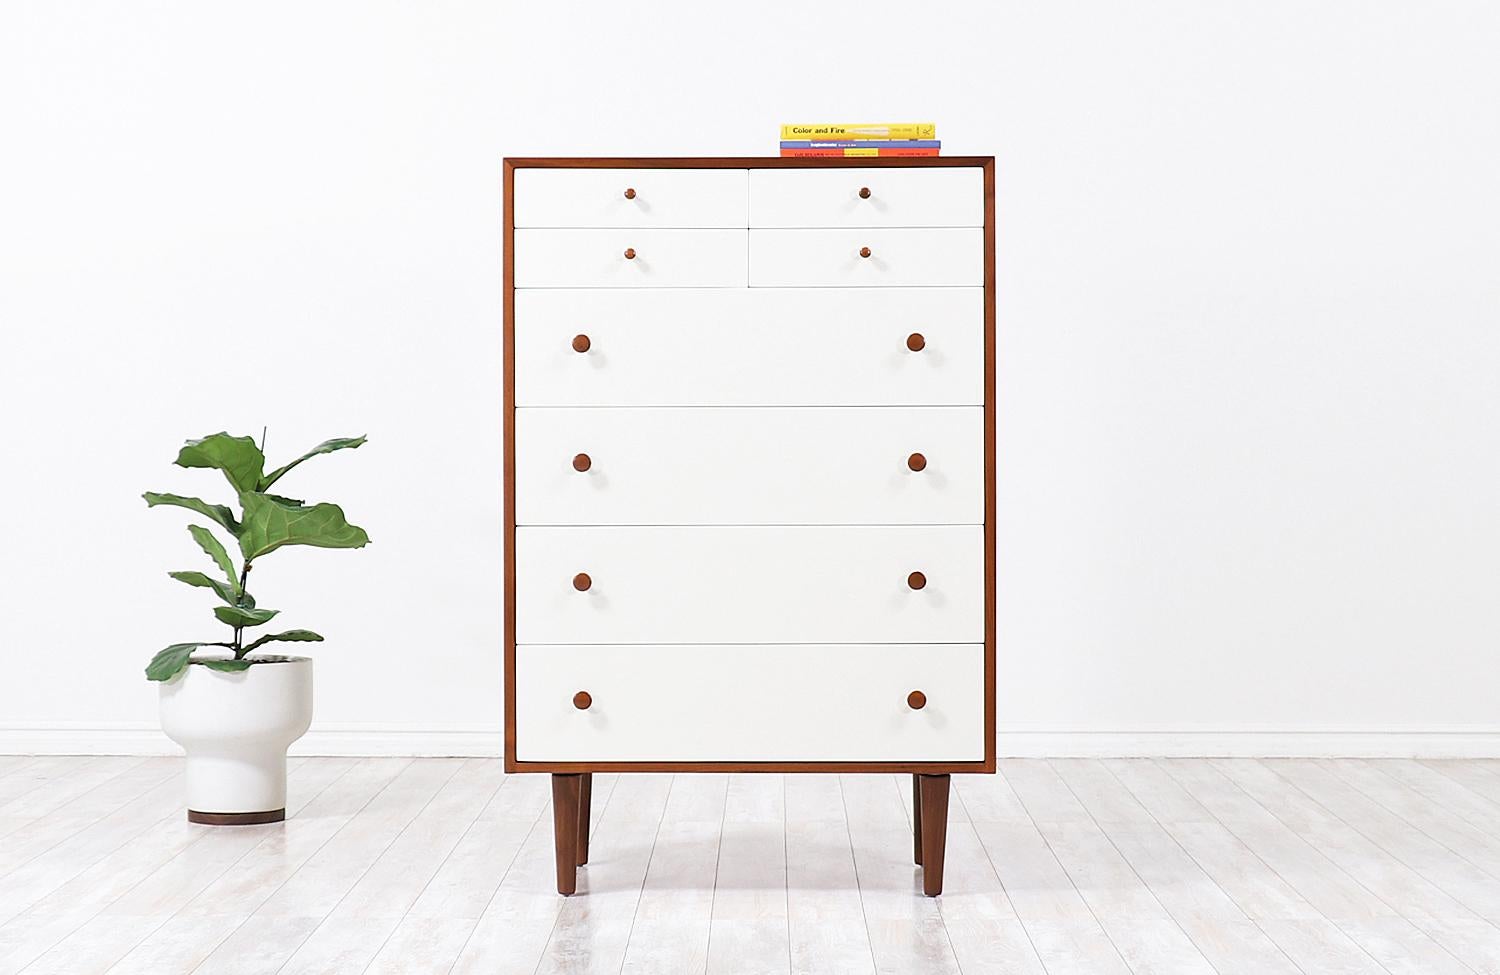 Elegant modern chest of drawers designed Glenn of California in the United States, circa 1950s. This tall and spacious chest design features a solid walnut wood construction with eight lacquered drawers that vary in size, adding a fun geometric